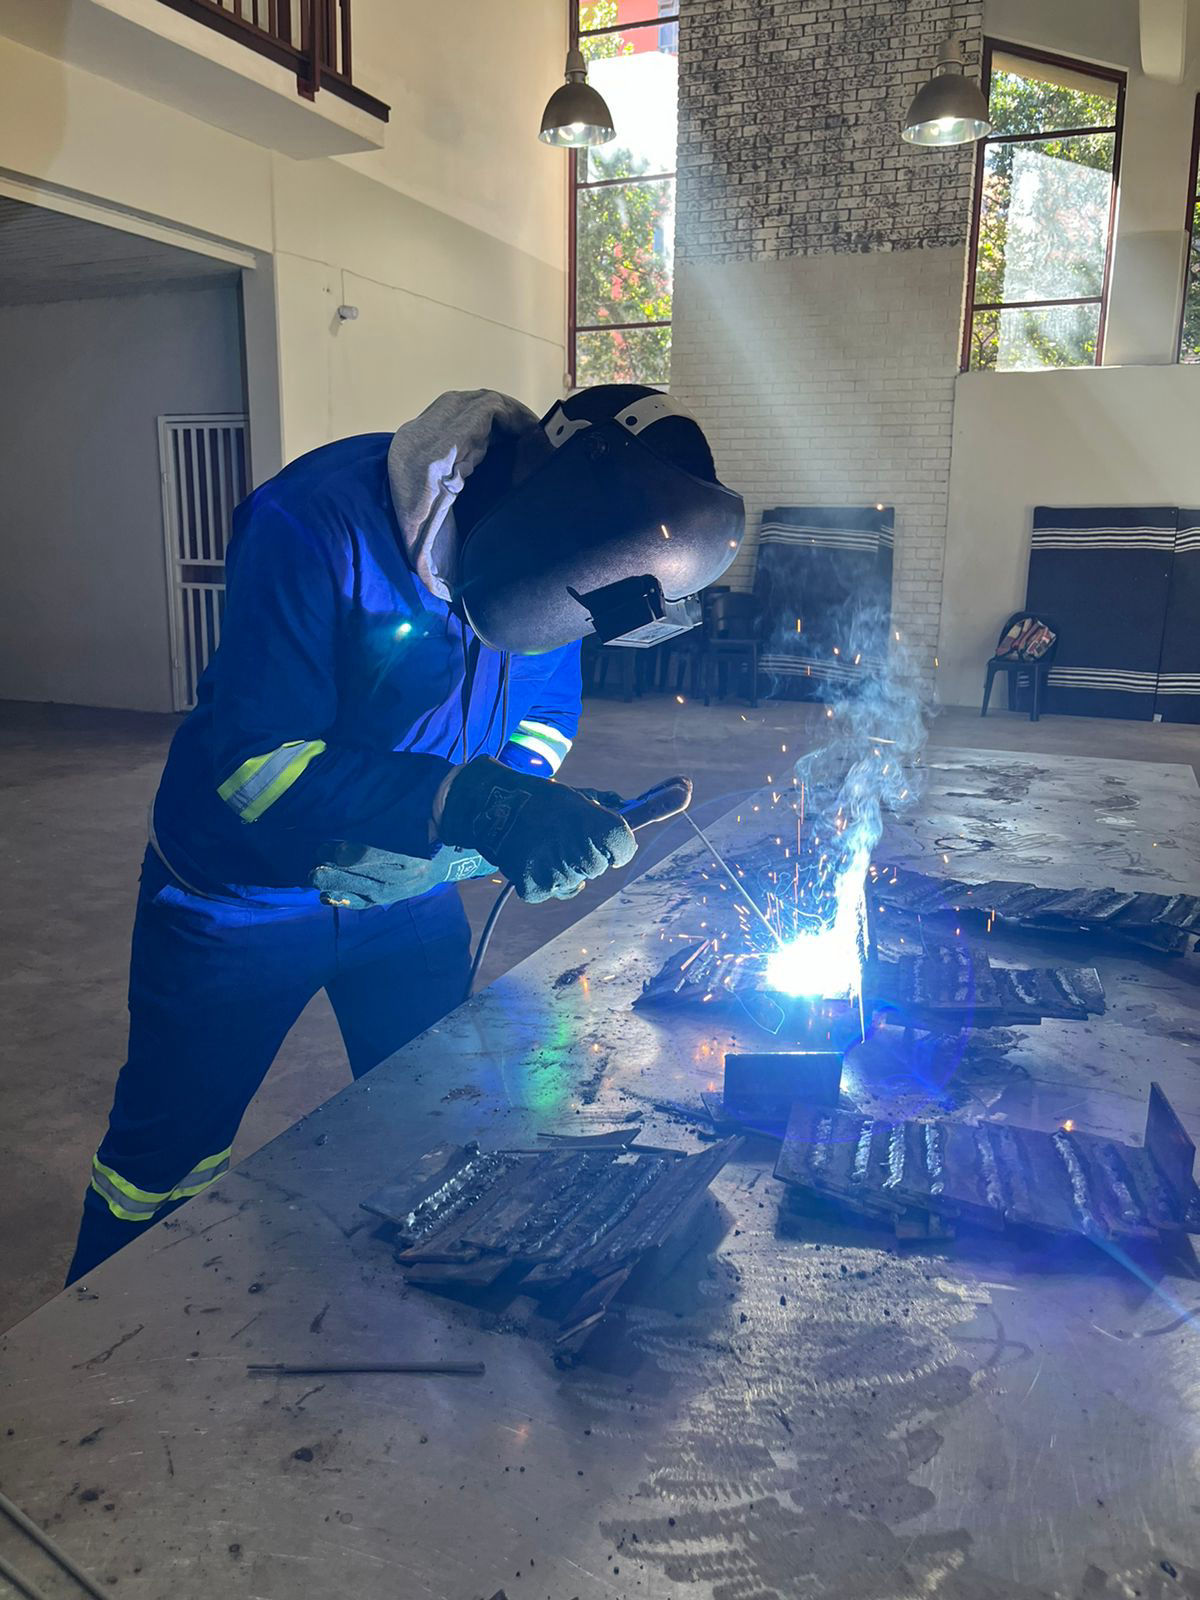 Introduction to welding at Outreach Foundation